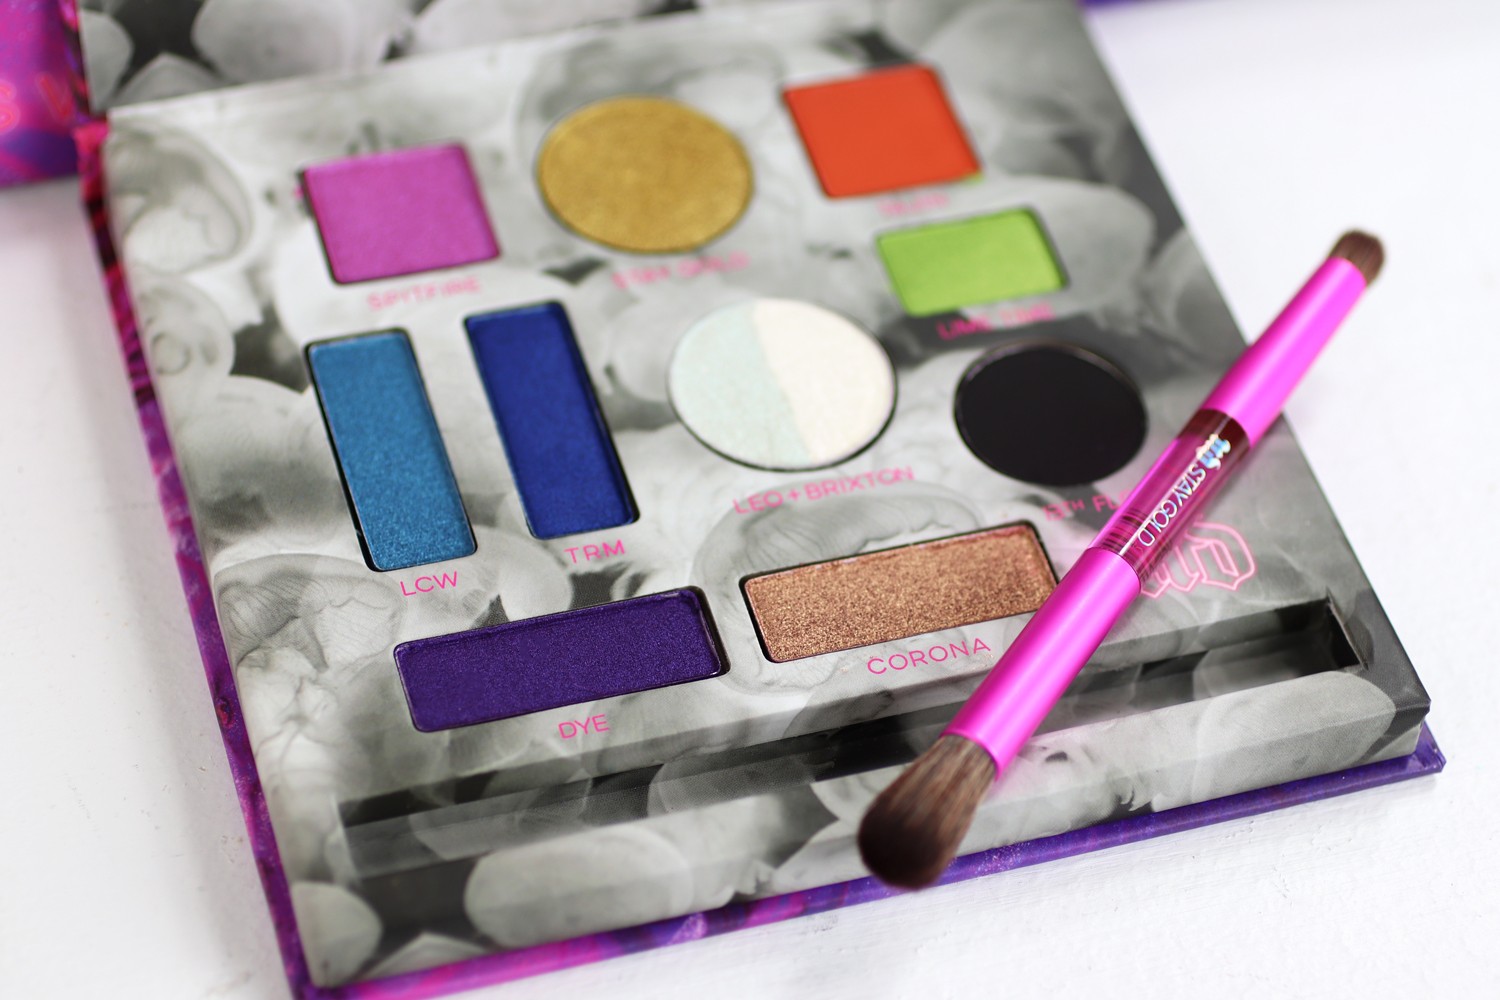 Urban Decay x Kristen Leanne Kaleidoscope Dream Palette Review and Swatches